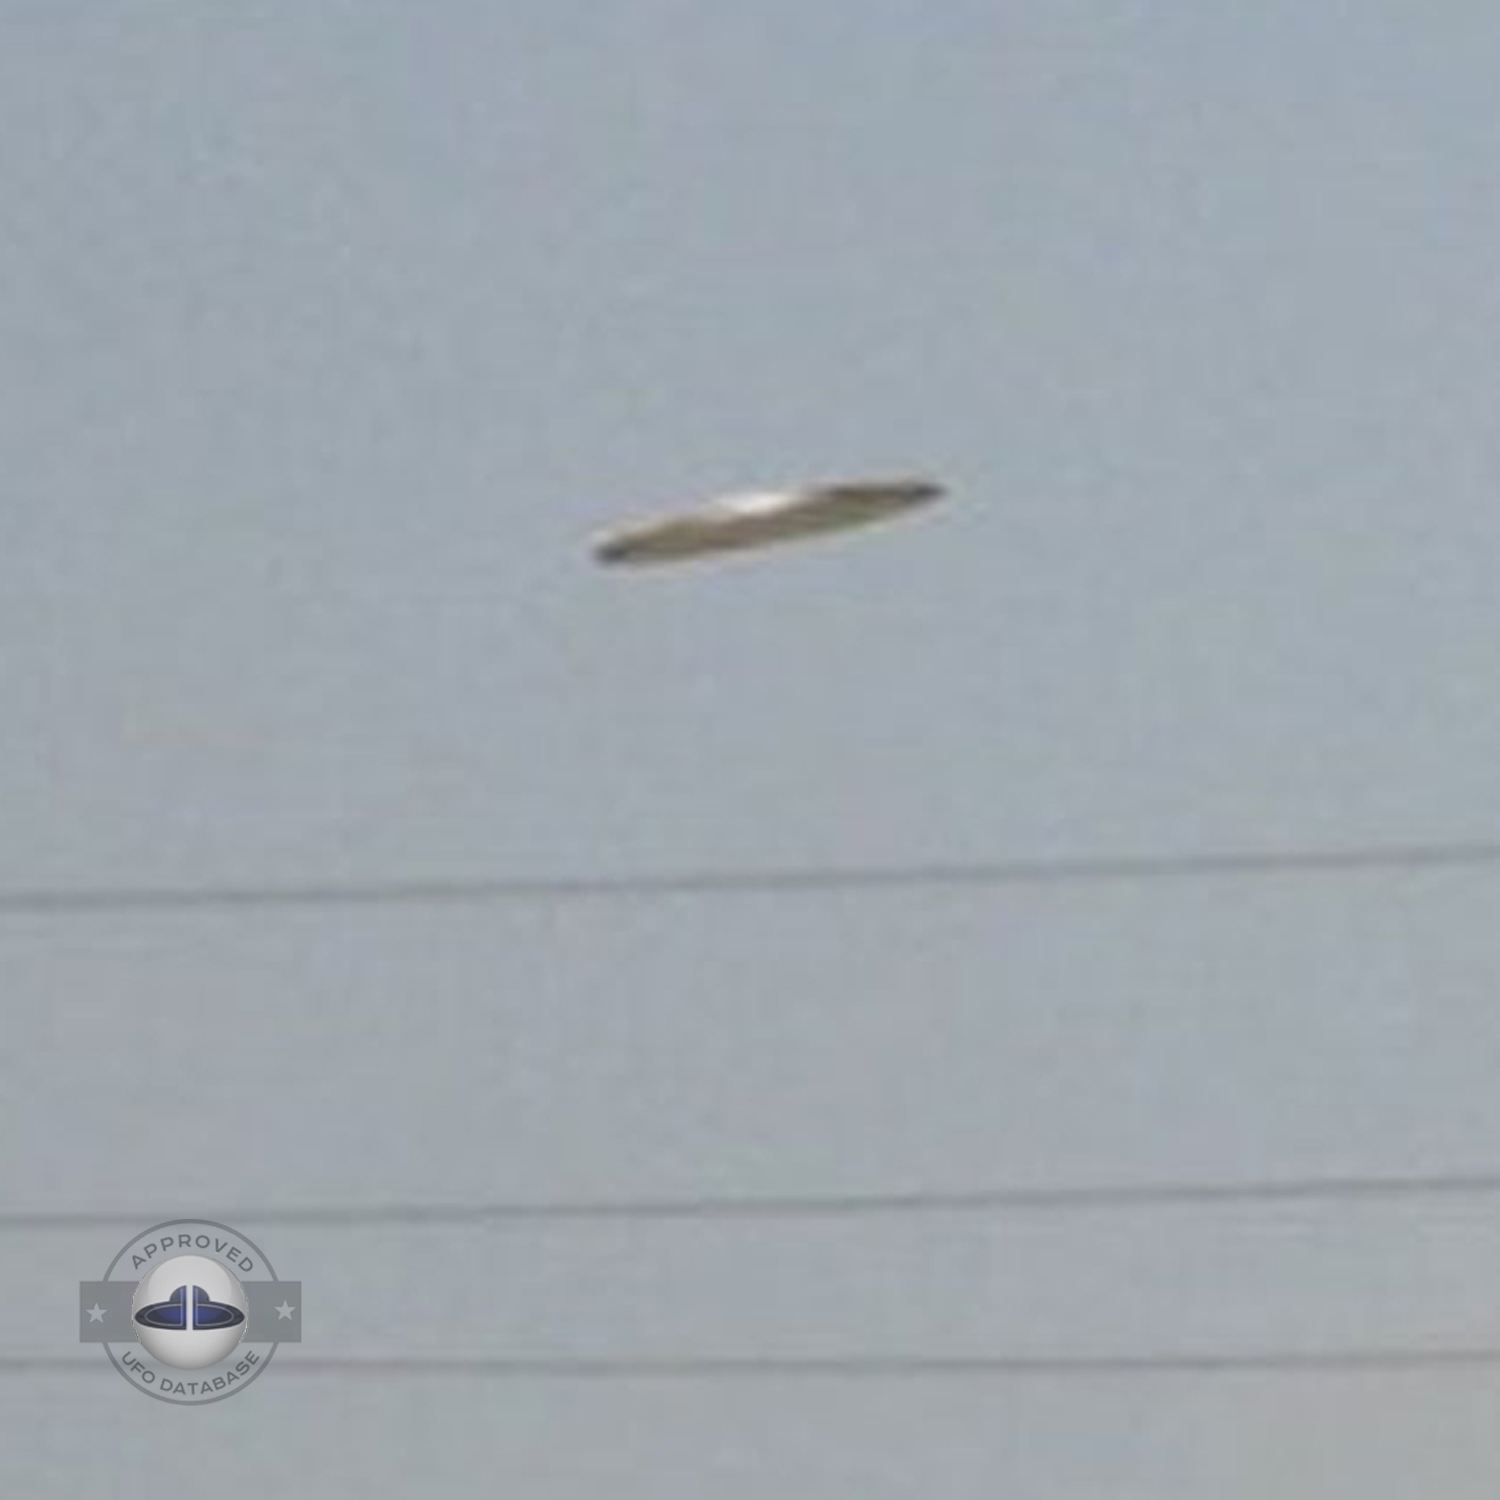 The flying saucer is flying over an industrial factory in Baghdad UFO Picture #58-4